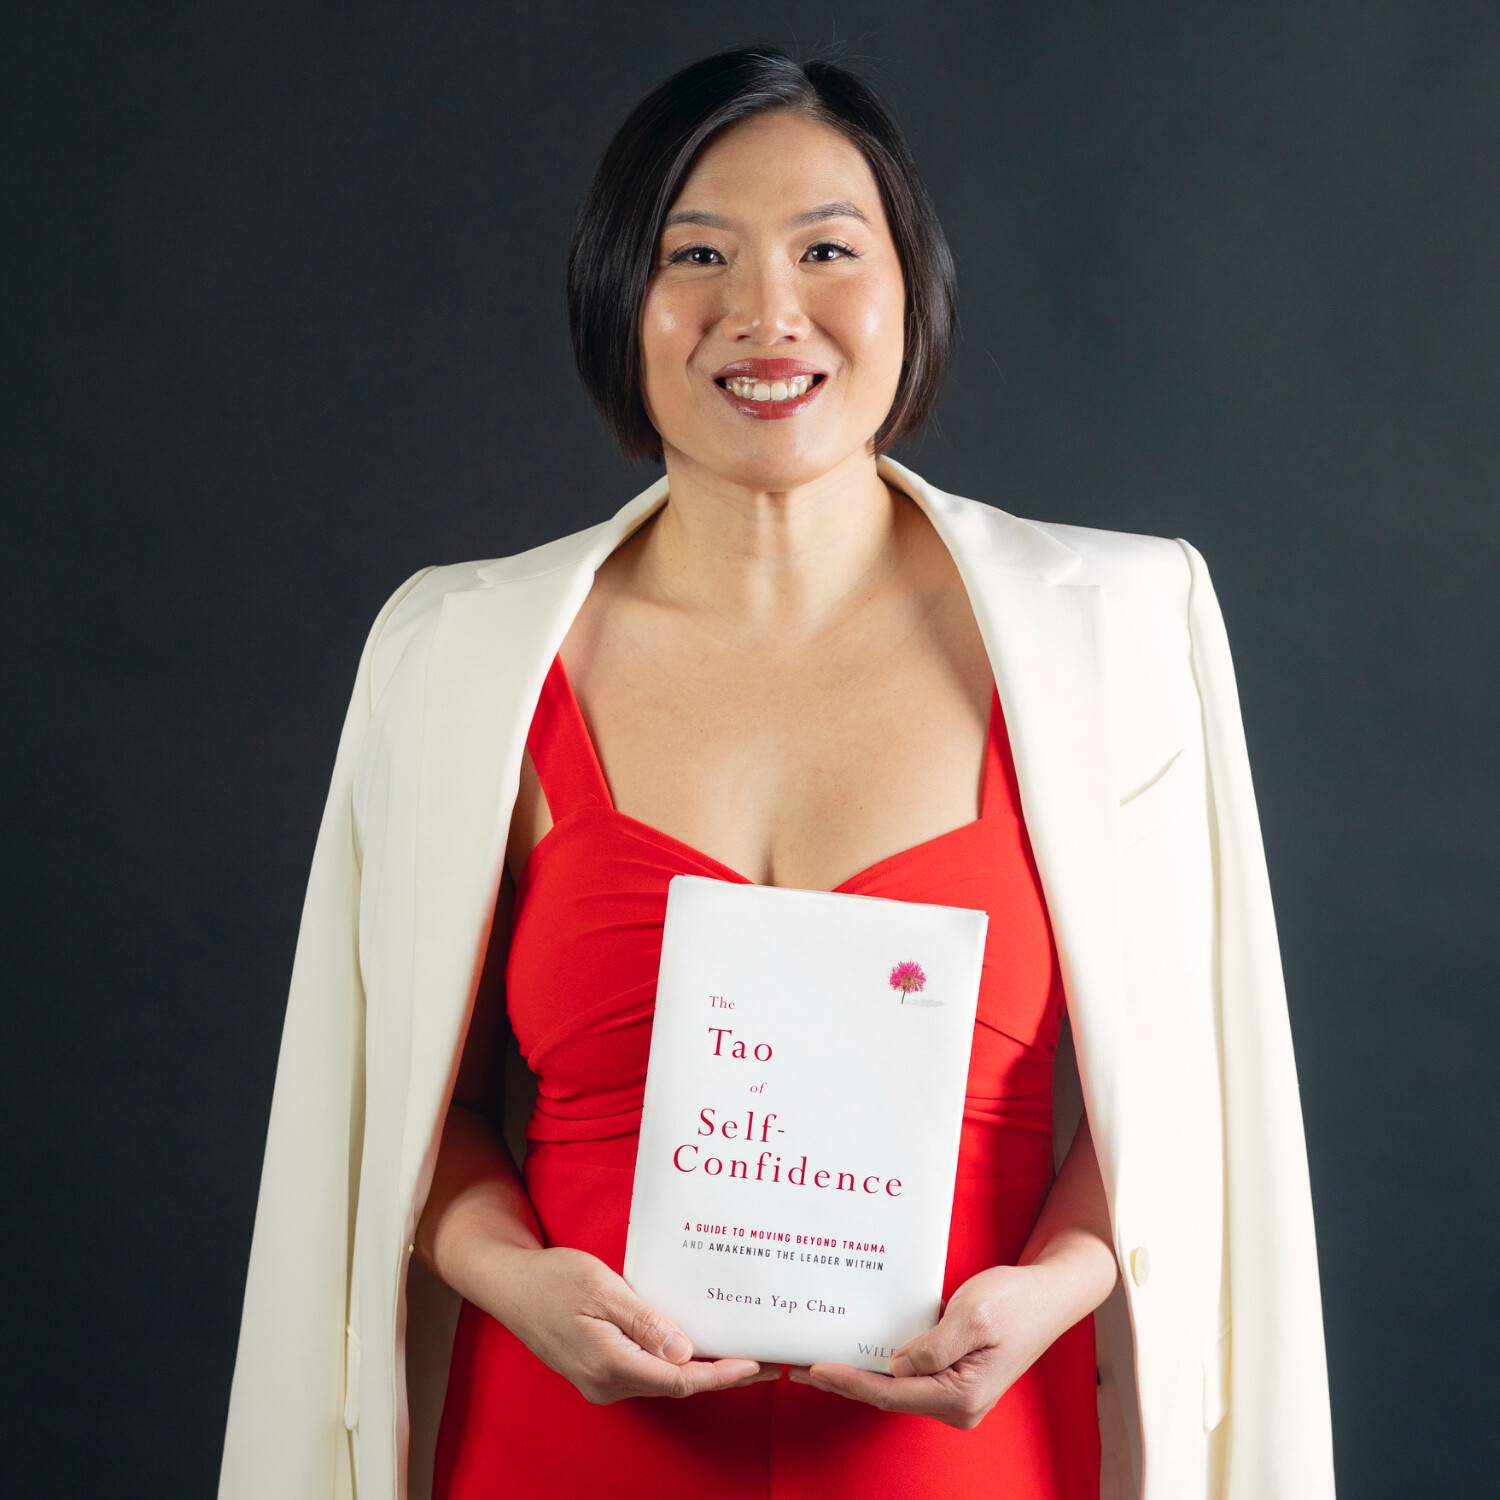 The Journey to Self-Confidence with Sheena Yap Chan